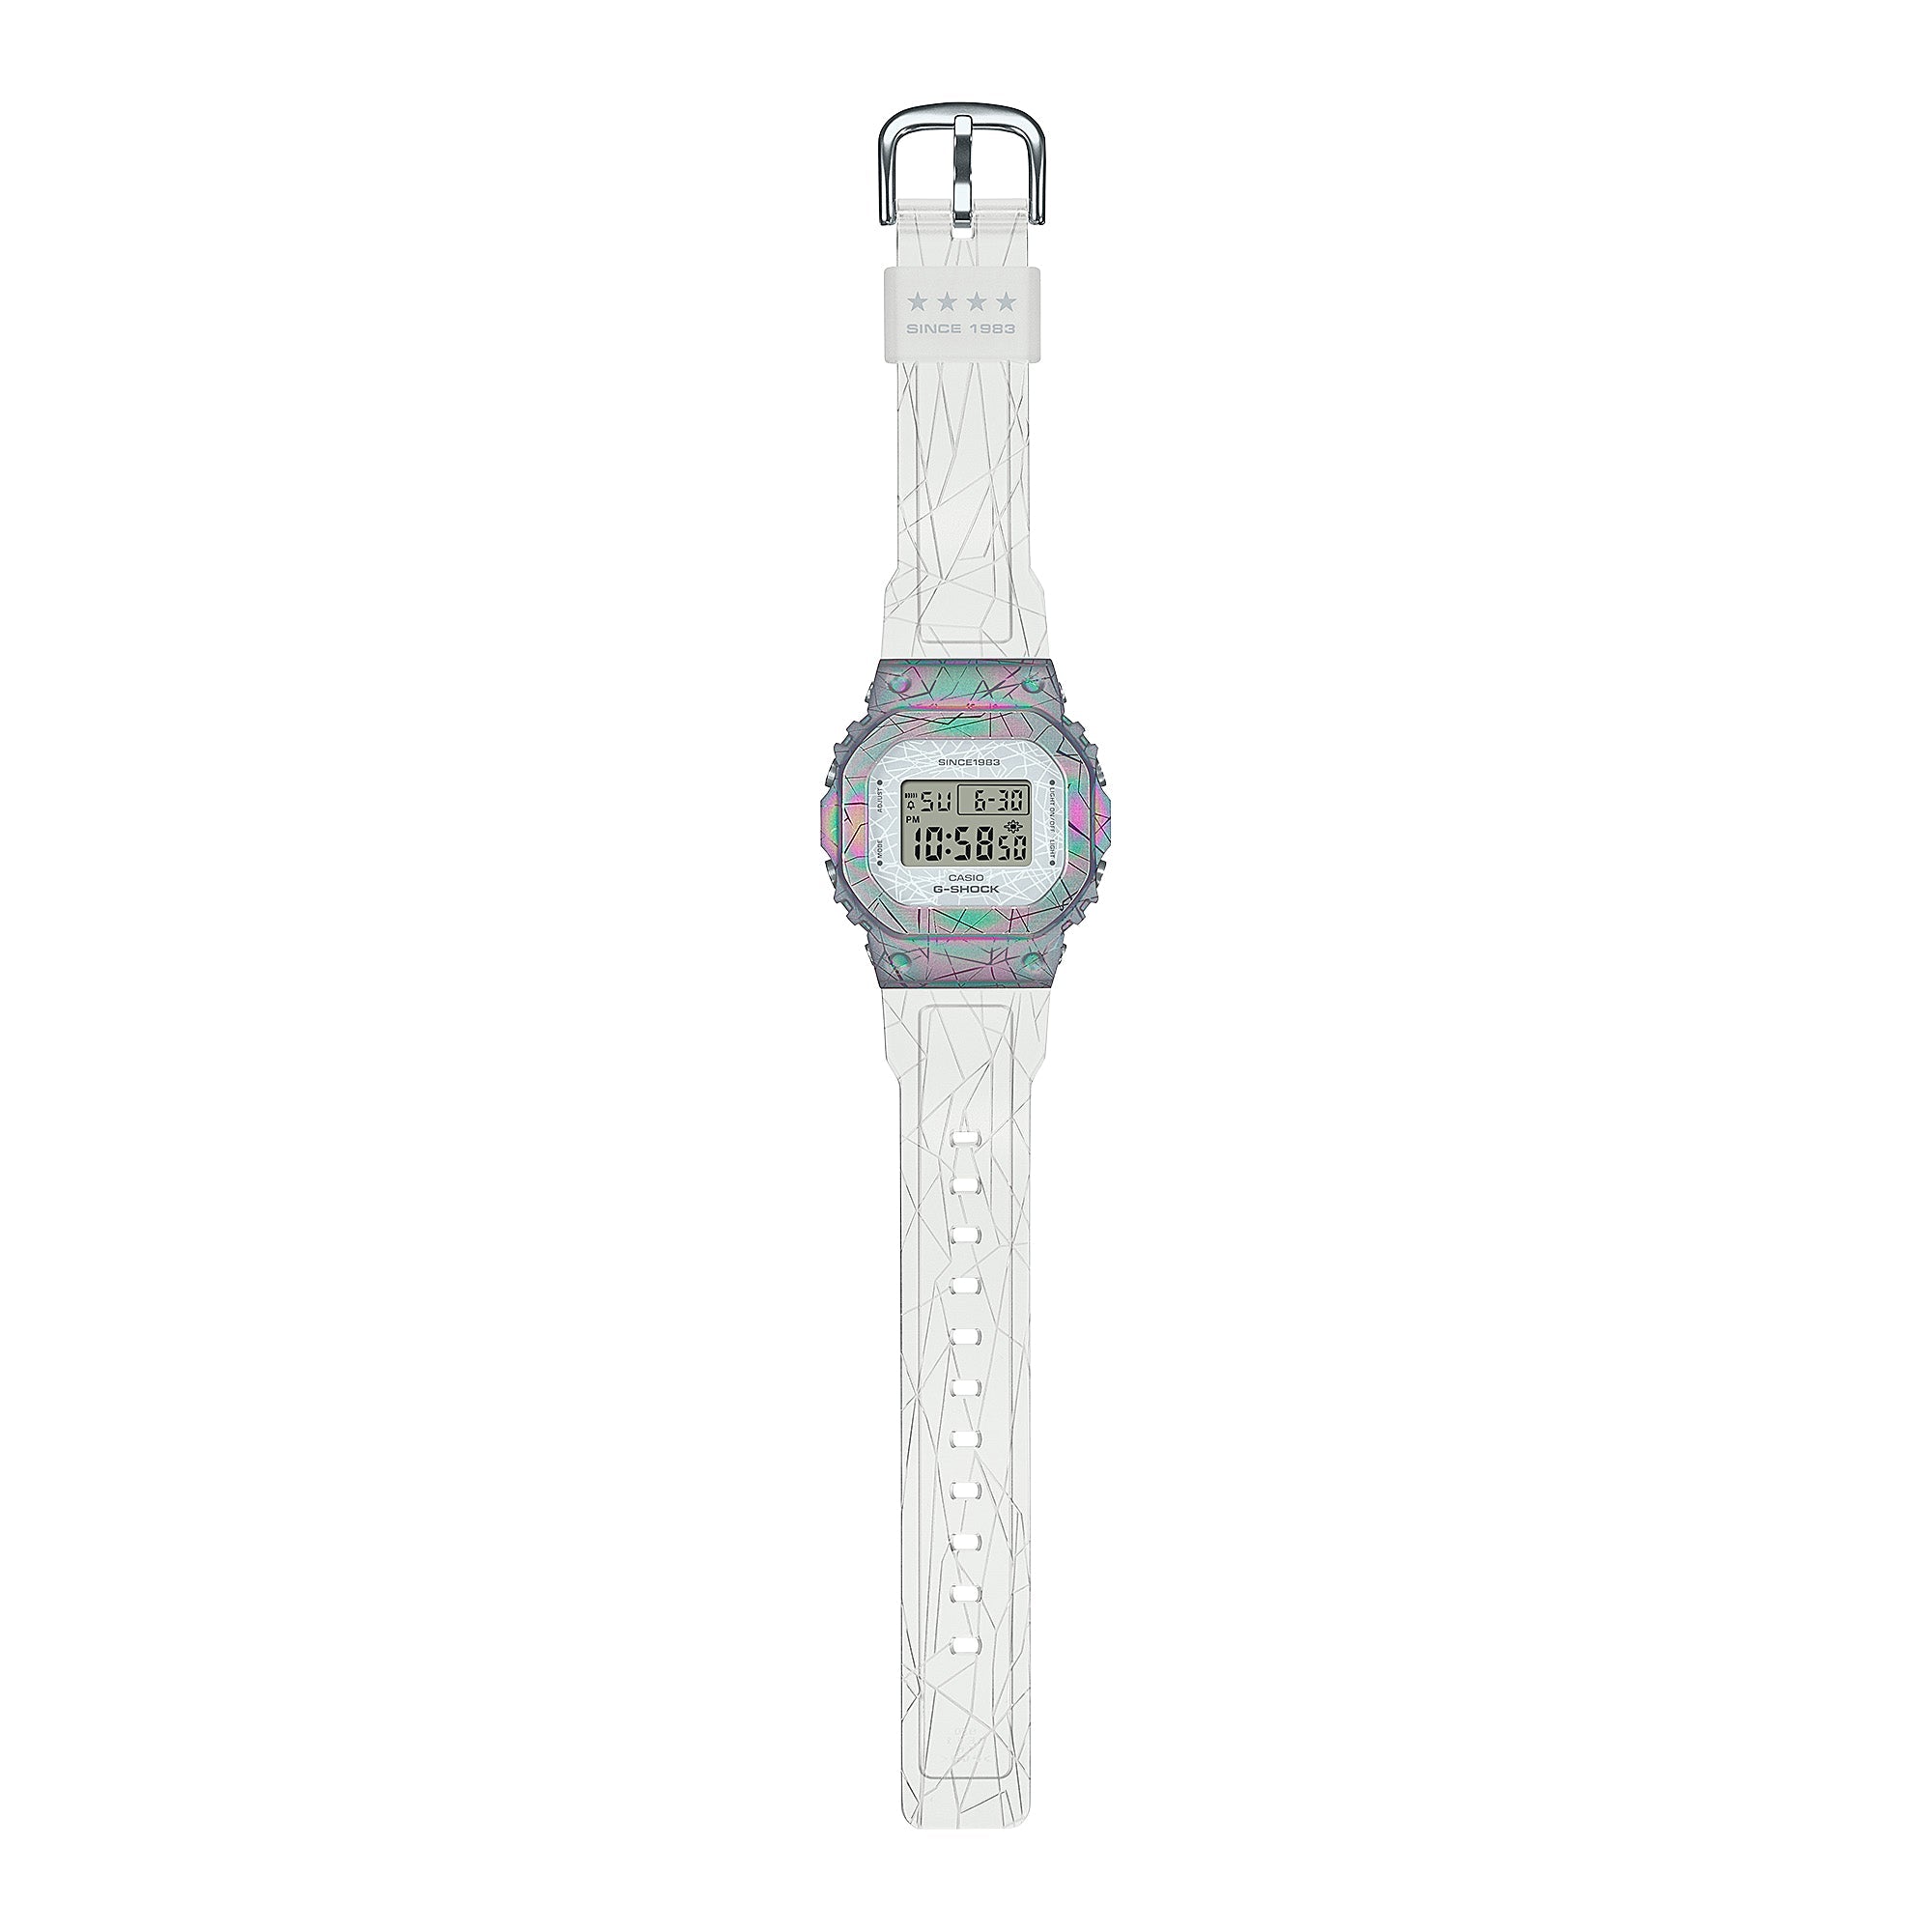 Casio G-Shock for Ladies' 40th Anniversary Adventurer’s Stone Limited Edition White Translucent Hot Stamped Resin Band Watch GMS5640GEM-7D GM-S5640GEM-7D GM-S5640GEM-7 Watchspree